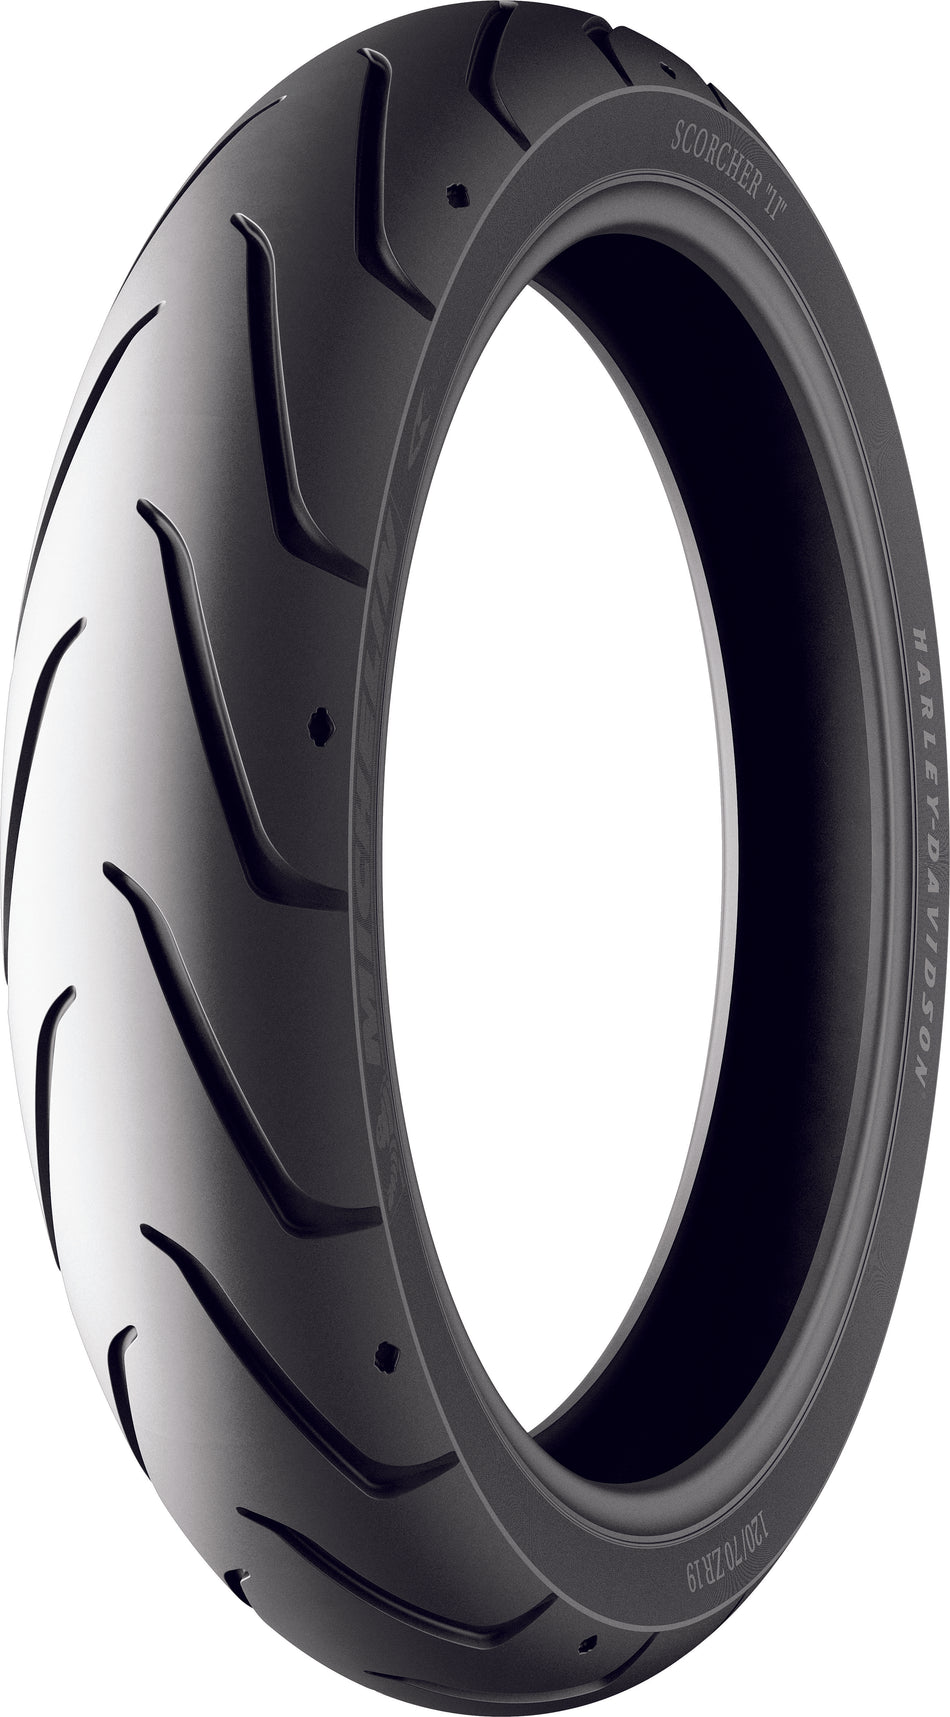 MICHELINTire Scorcher 11 Front 160/60r18 70v Radial Tl11169